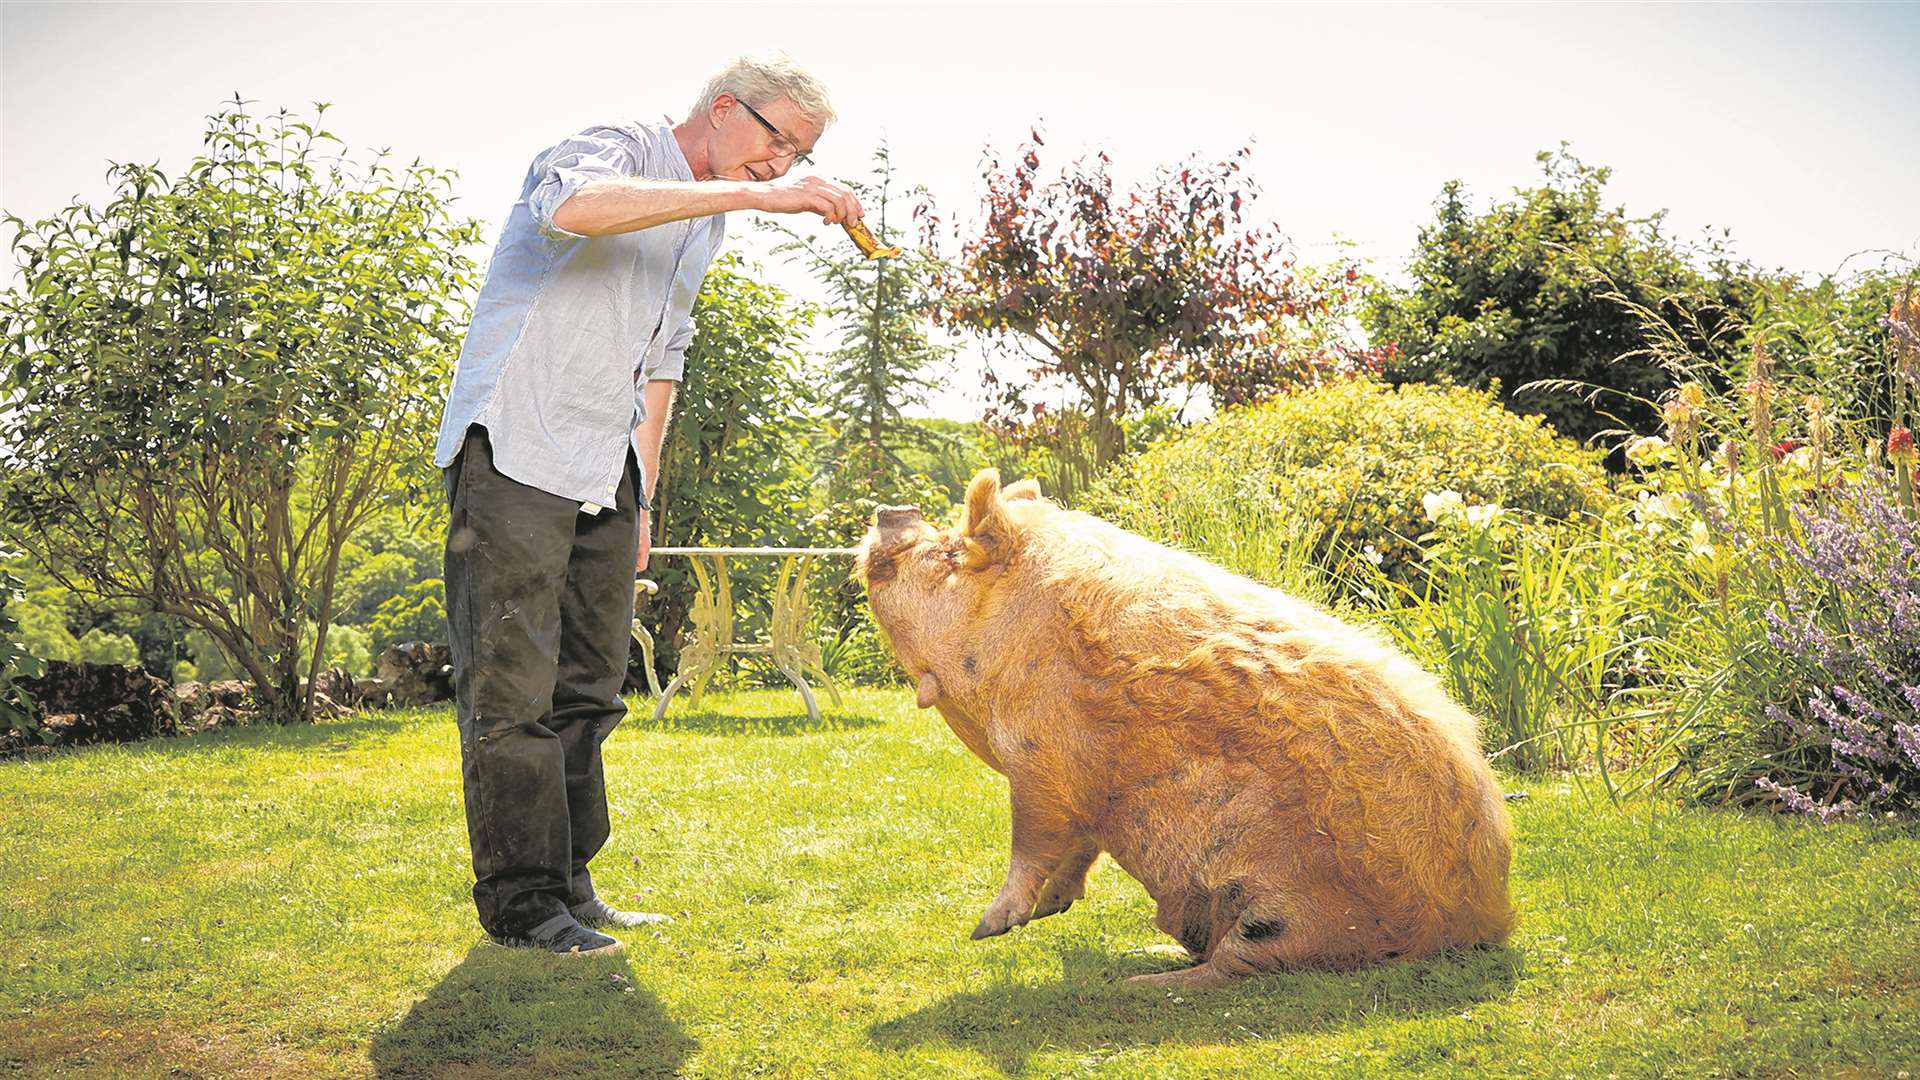 Paul O'Grady with his pig Picture: Nicky Johnston/PA